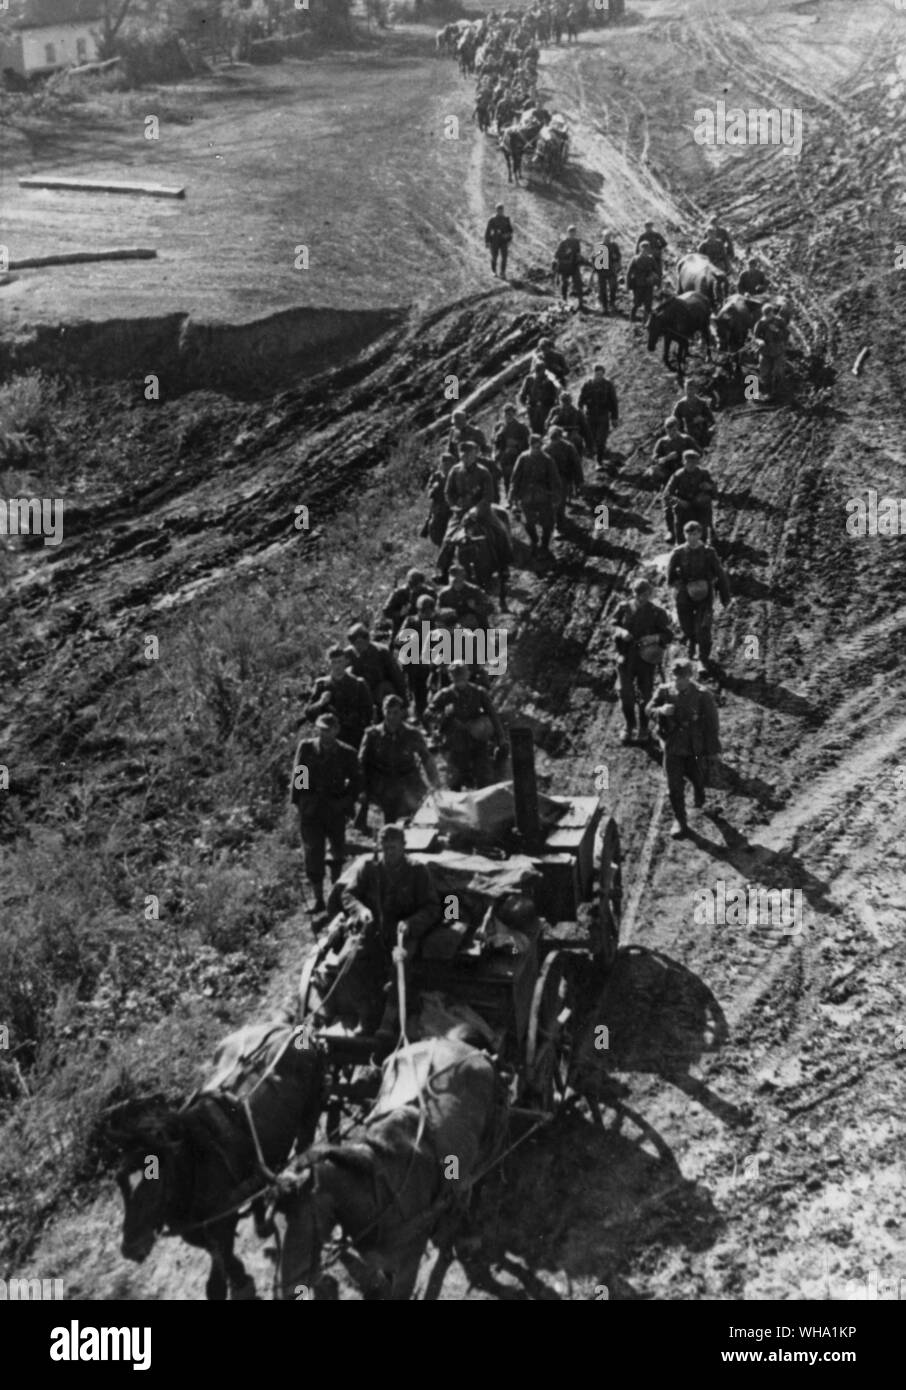 WW2: Russia/ The Germans are admitting their desperate position on the Eastern Front. Photo shows: The big retreat of the Nazi Wehrmacht in rainy weather through the muddy roads. November 1943. Stock Photo